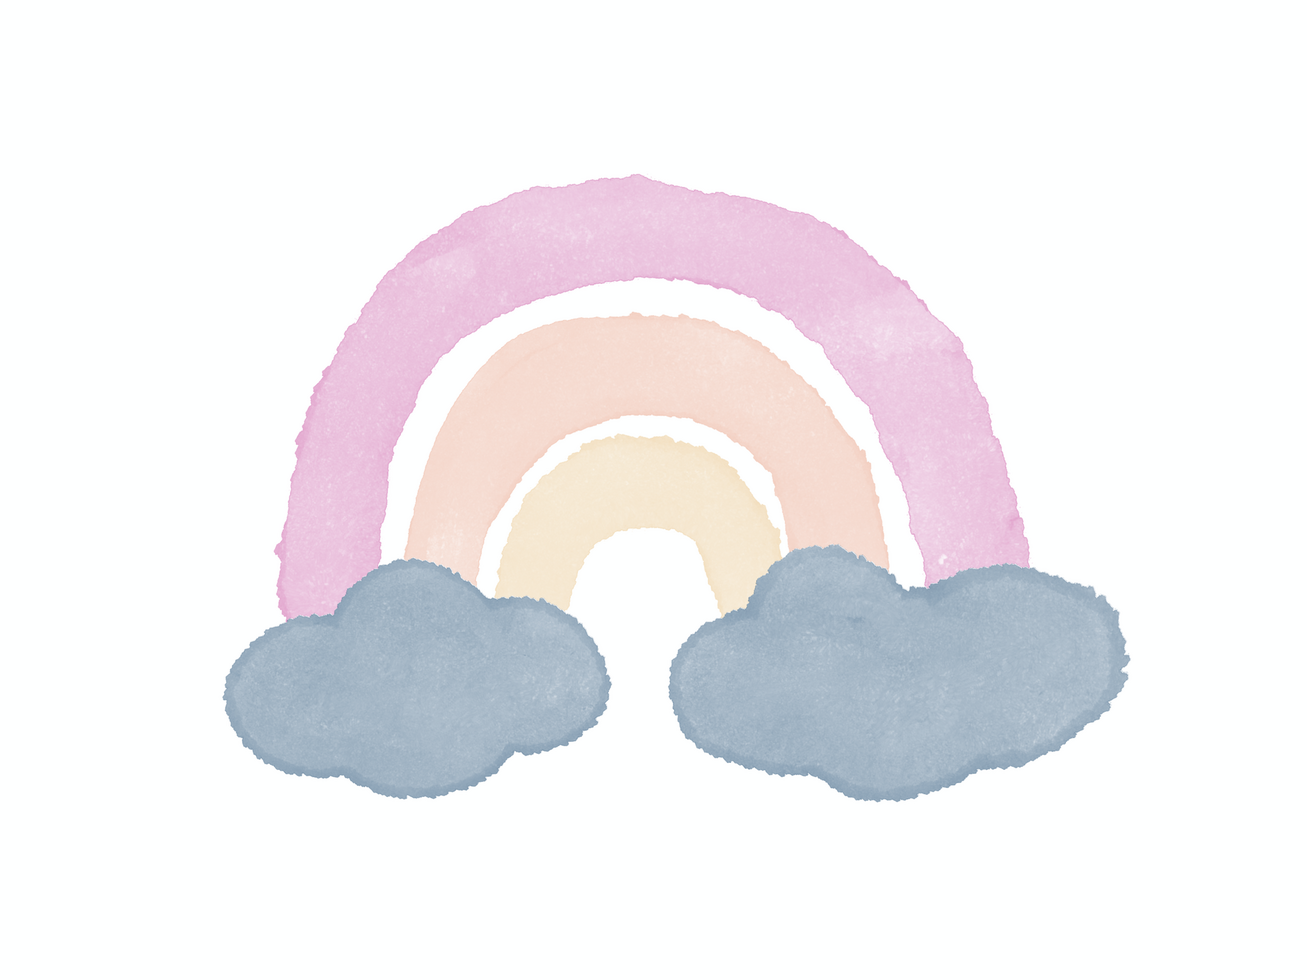 Cute childish drawing on a white background. Minimalistic illustration of rainbow and clouds in watercolor style psd